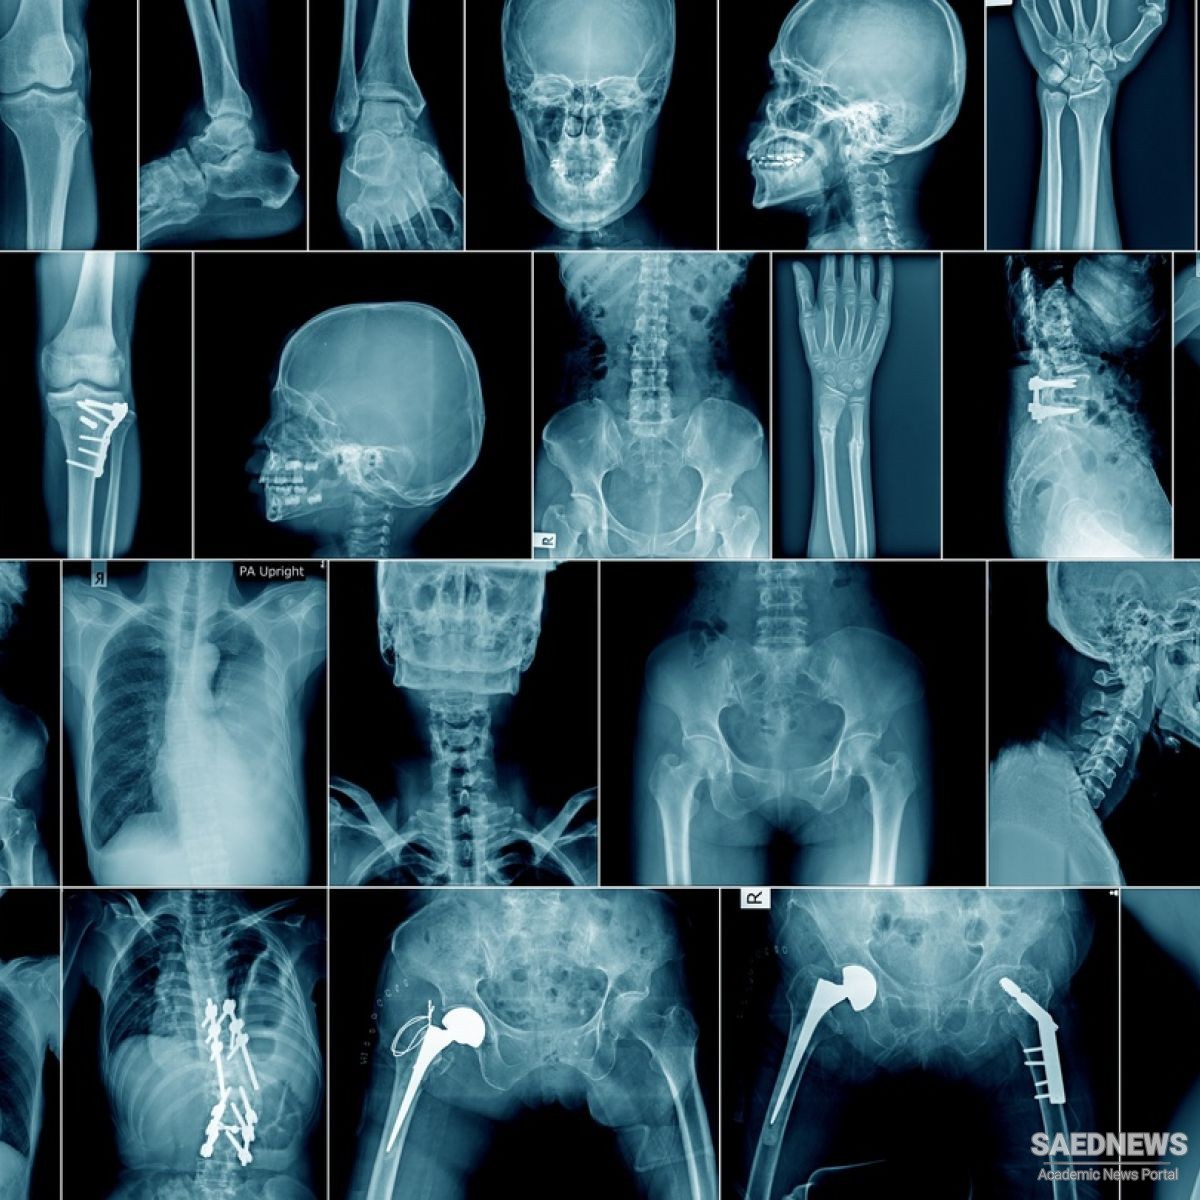 X-ray Imaging, Electromagnetic Radiation and Medical Use of Nuclear Technology